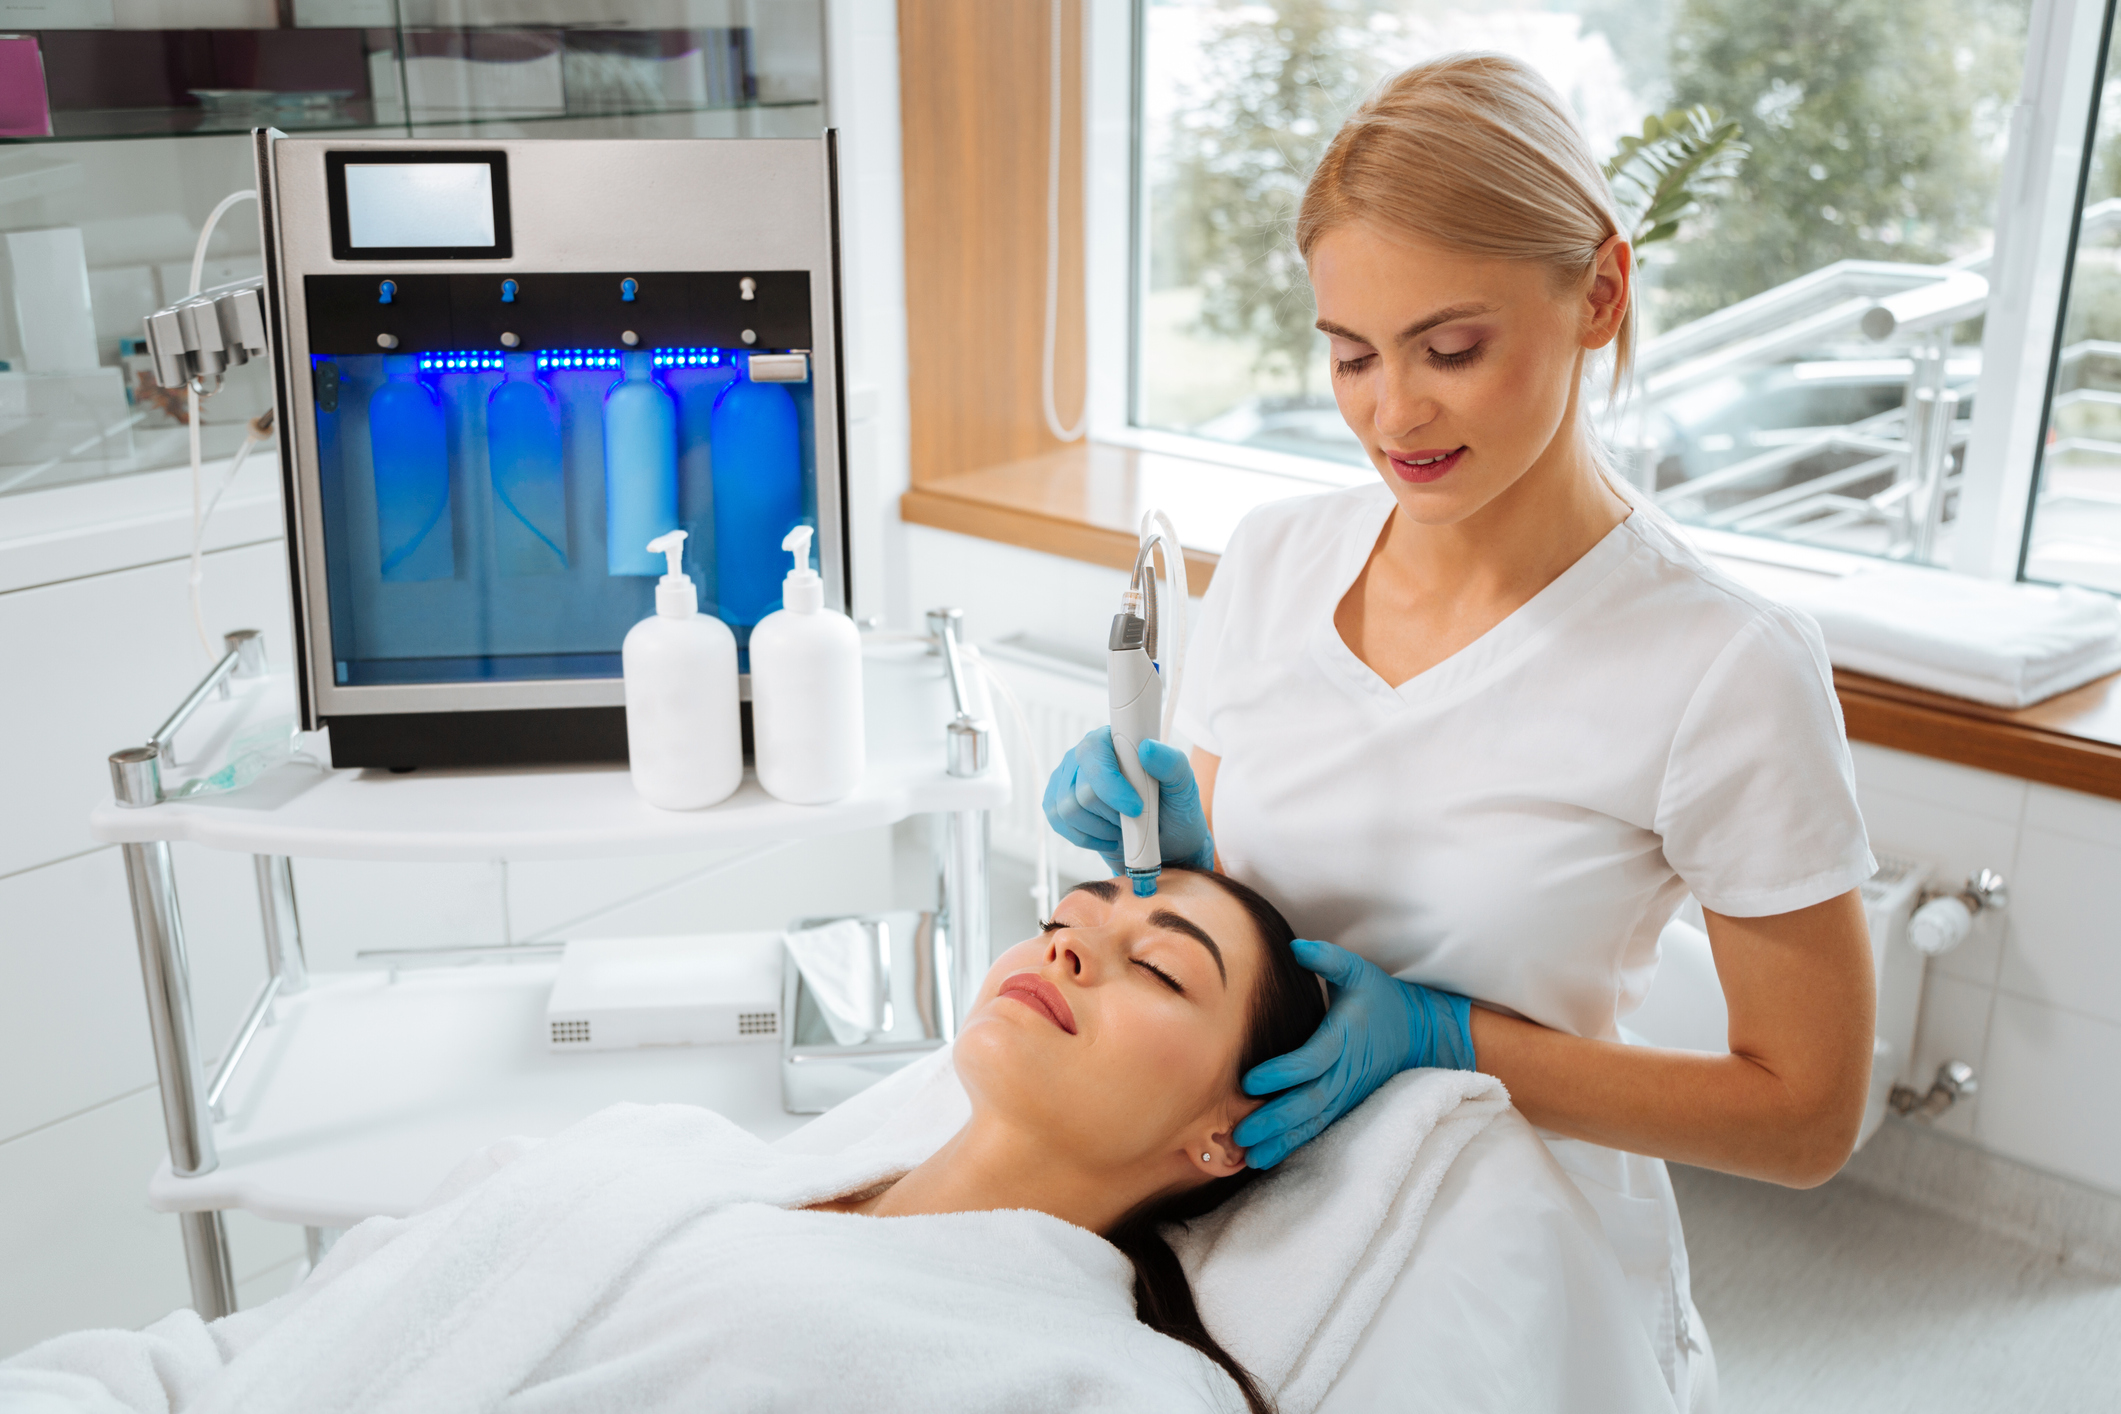 The Edge Hydrafacial from Laser Resellers